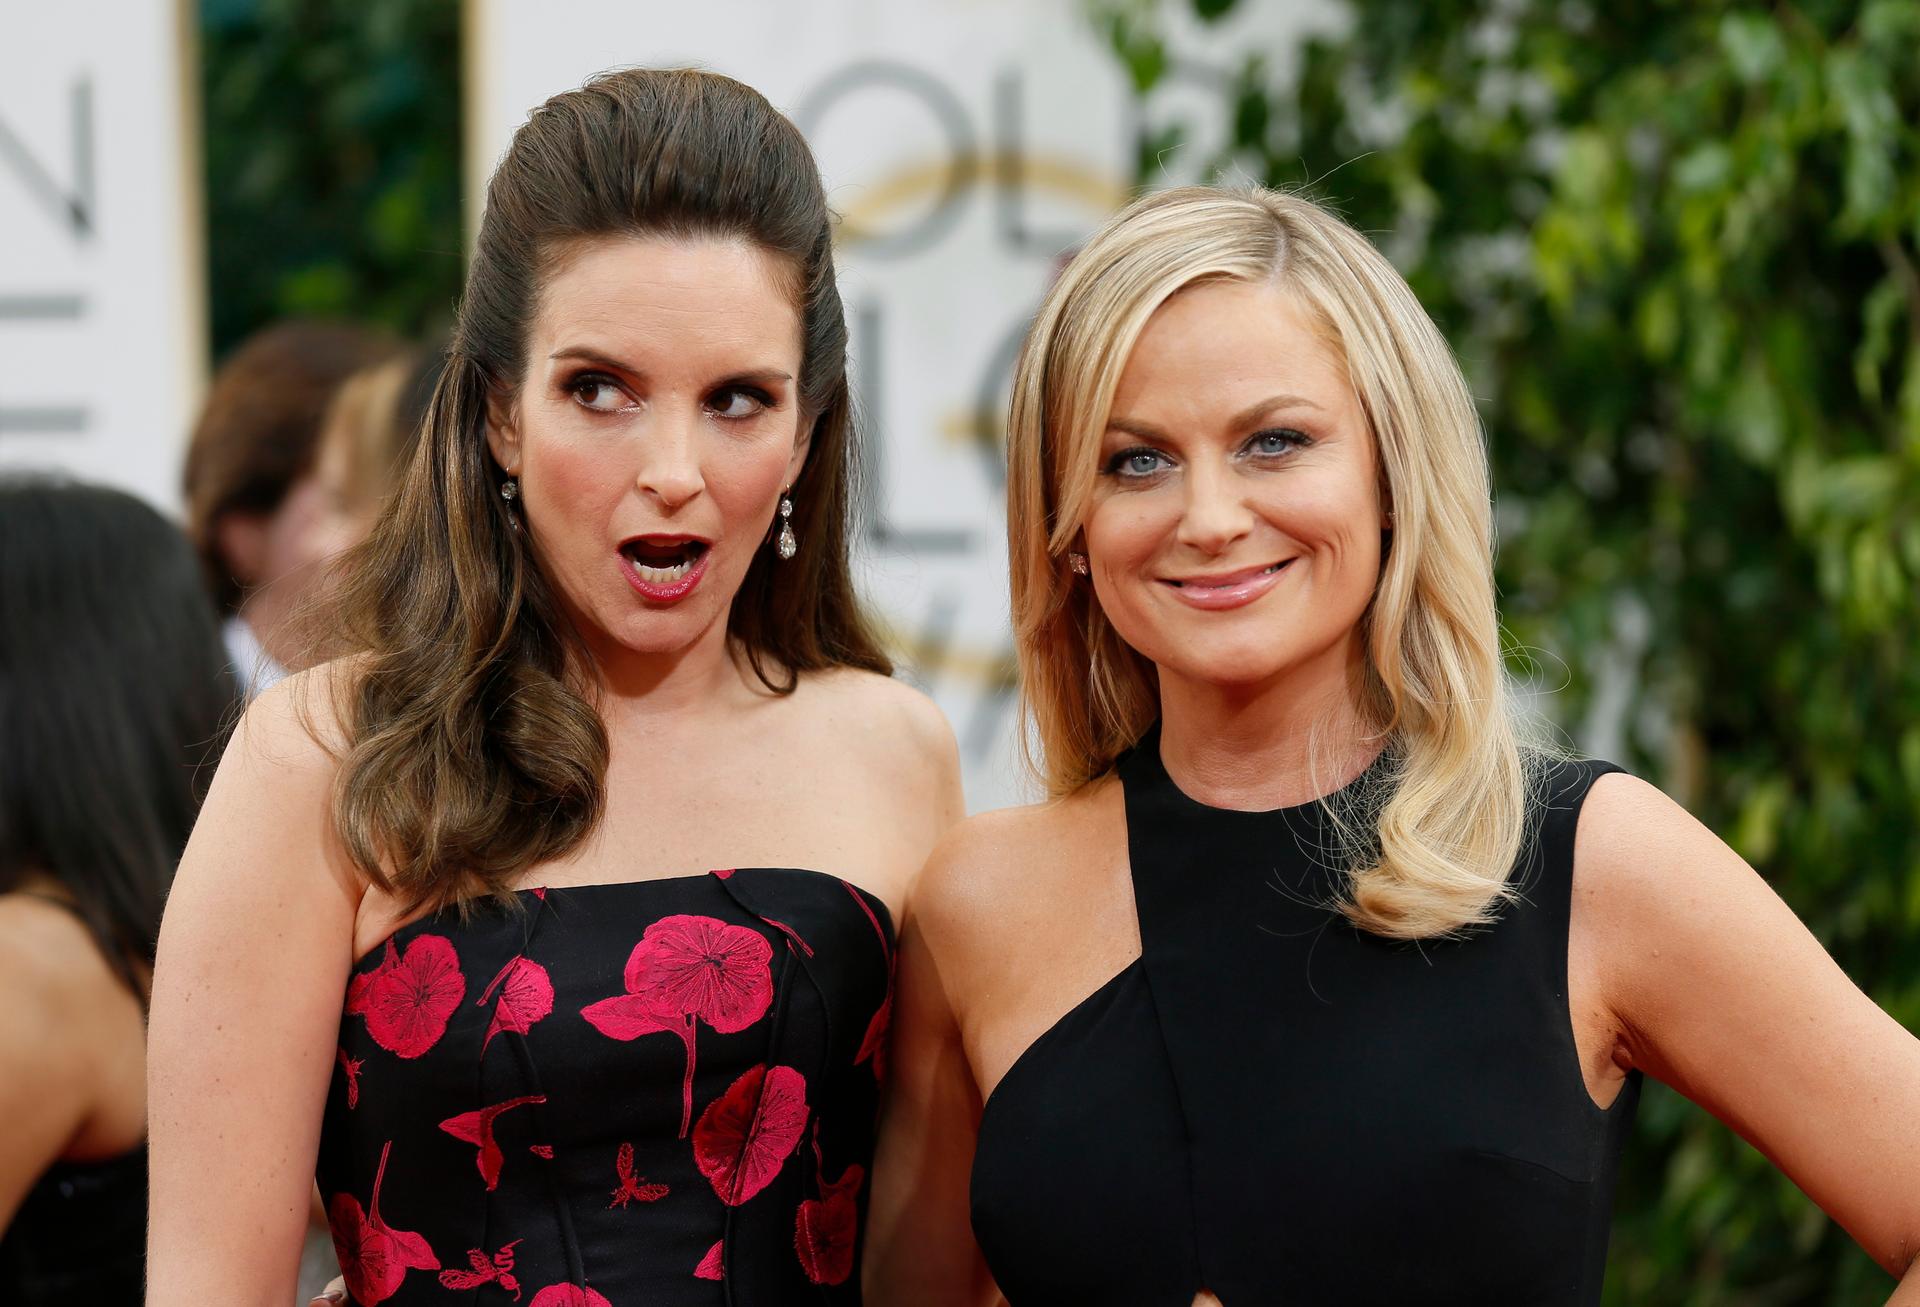 Golden Globes hosts Tina Fey and Amy Poehler pose at the 2014 Golden Globe Awards.